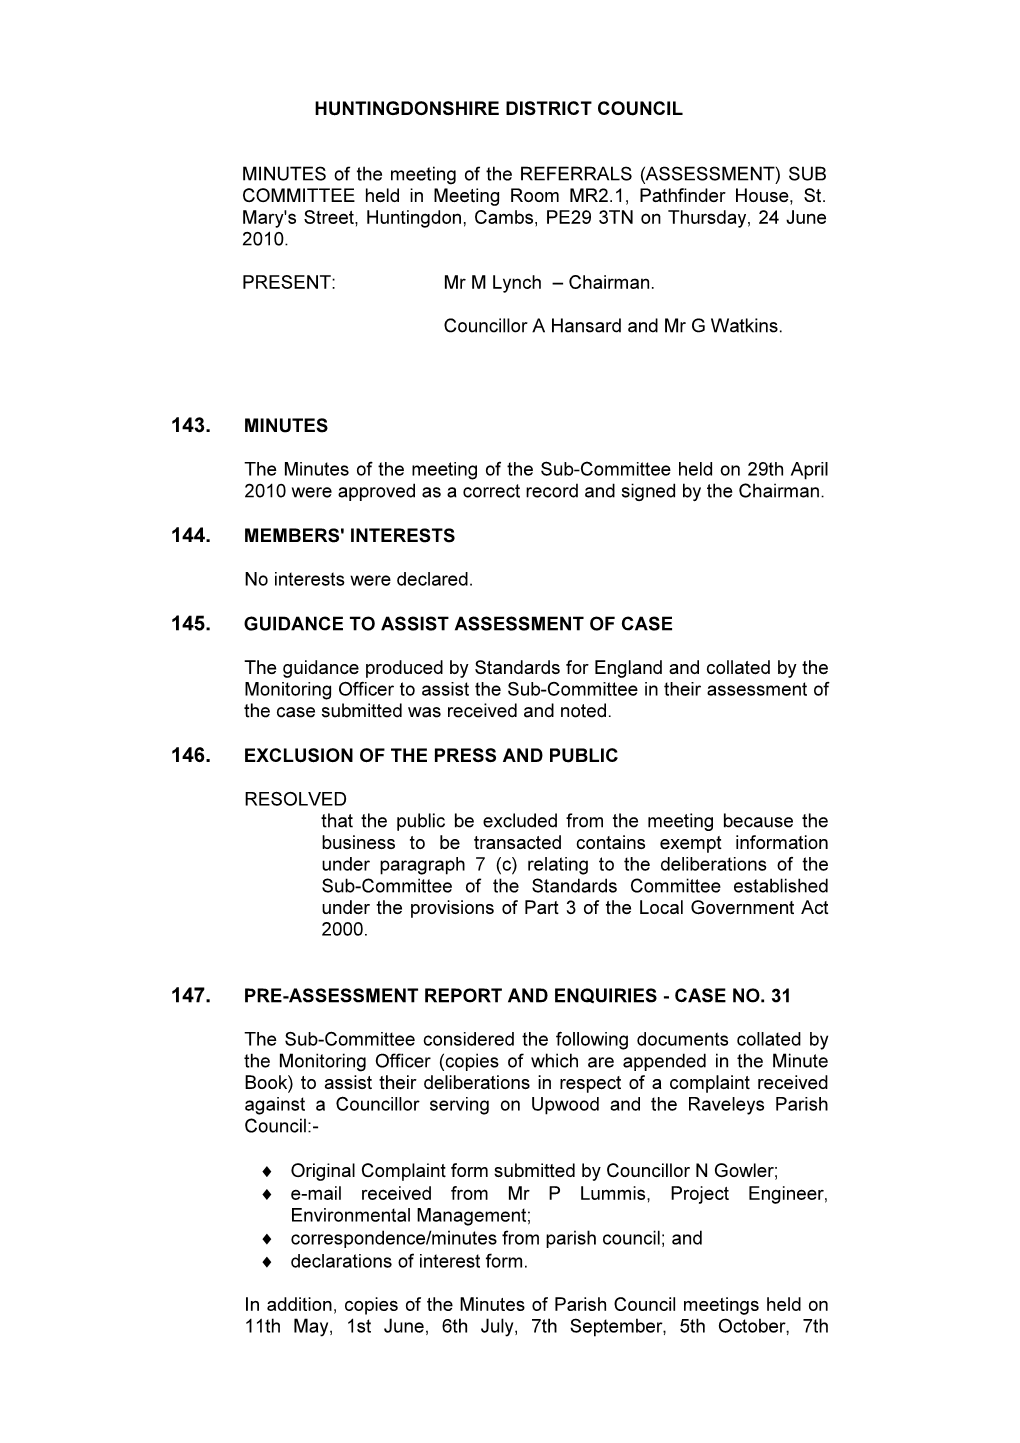 HUNTINGDONSHIRE DISTRICT COUNCIL MINUTES of the Meeting